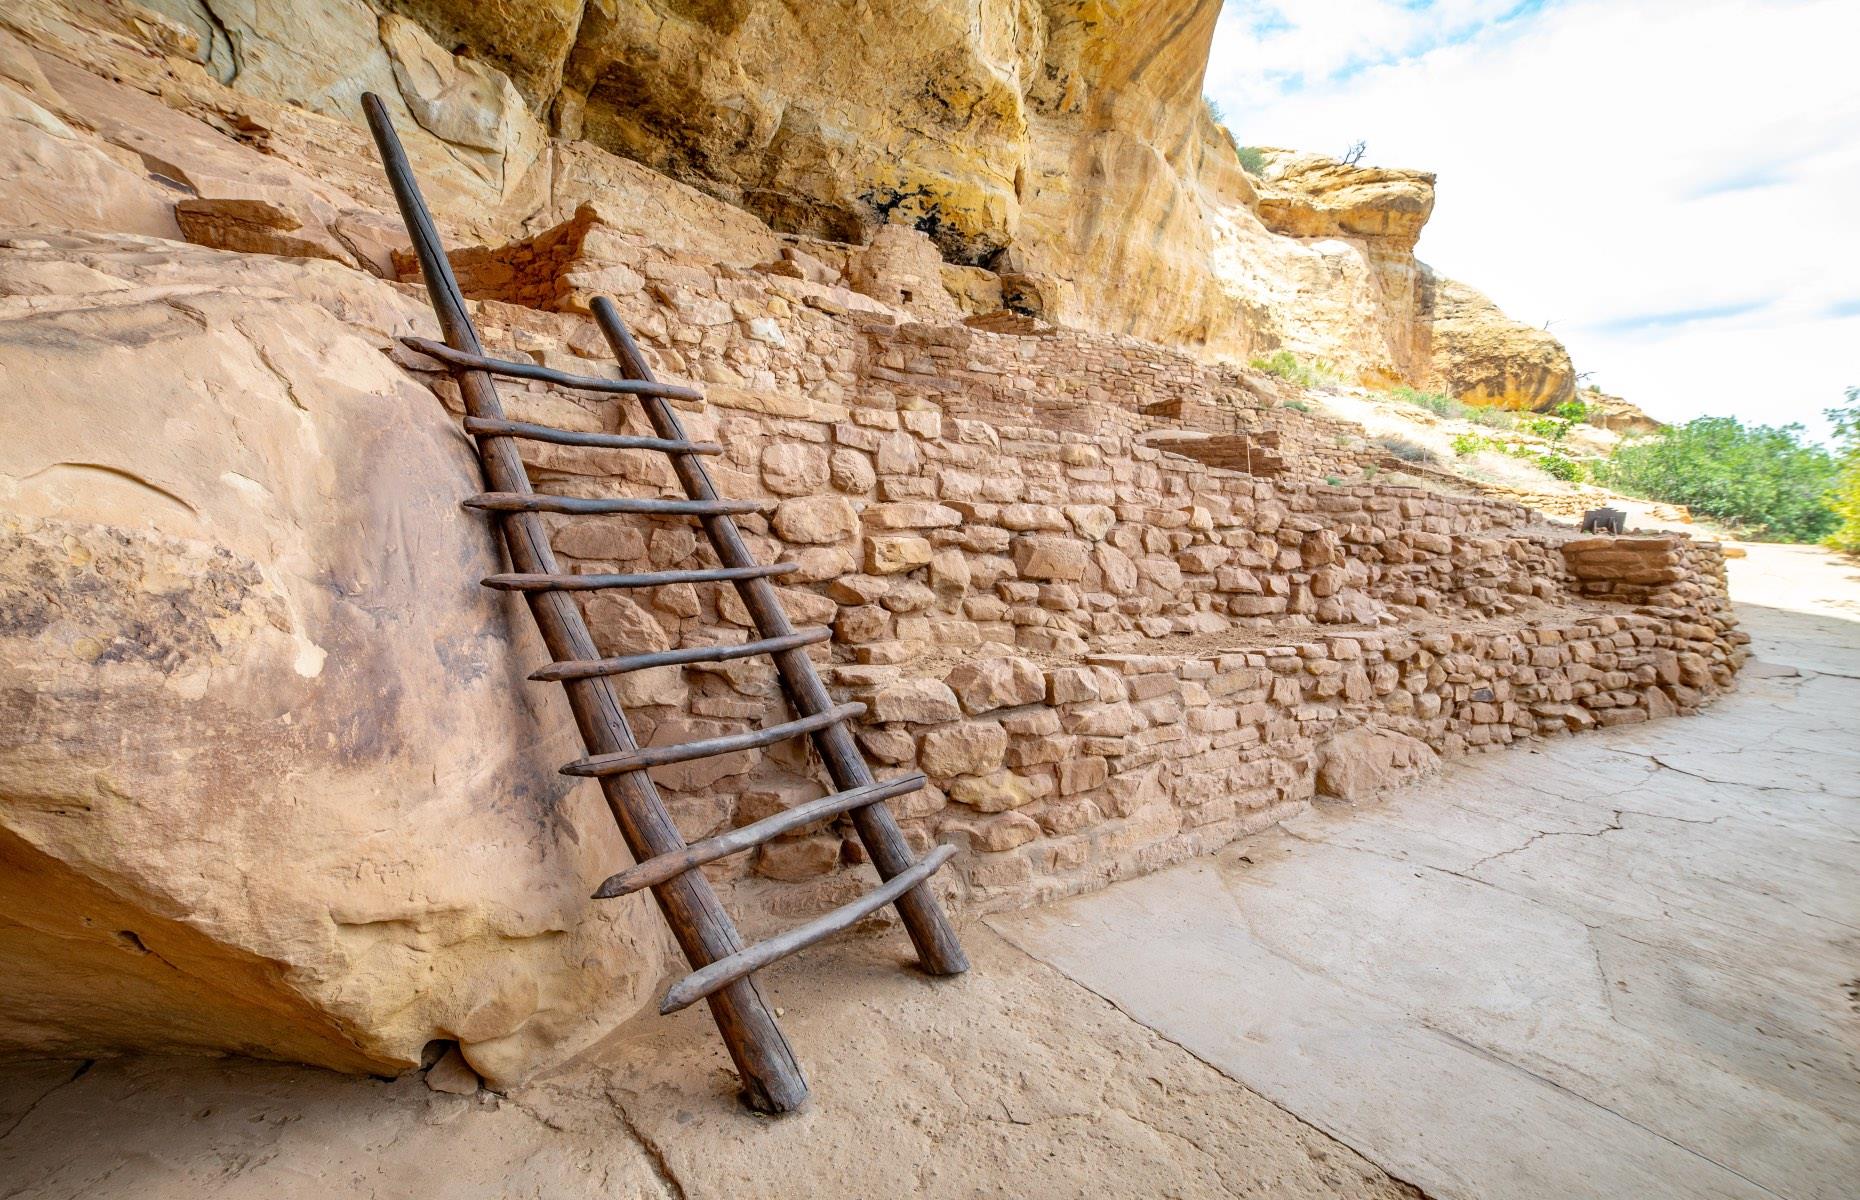 If you like climbing ladders and crawling through tunnels, you'll enjoy touring several of the sites, either by yourself on a self-guided hike or as part of a tour. Balcony House (pictured), Cliff Palace and Long House cliff dwellings can only be visited on a ranger-guided tour, while Step House is open for self-guided tours. It's fascinating to see ceilings blackened with smoke.